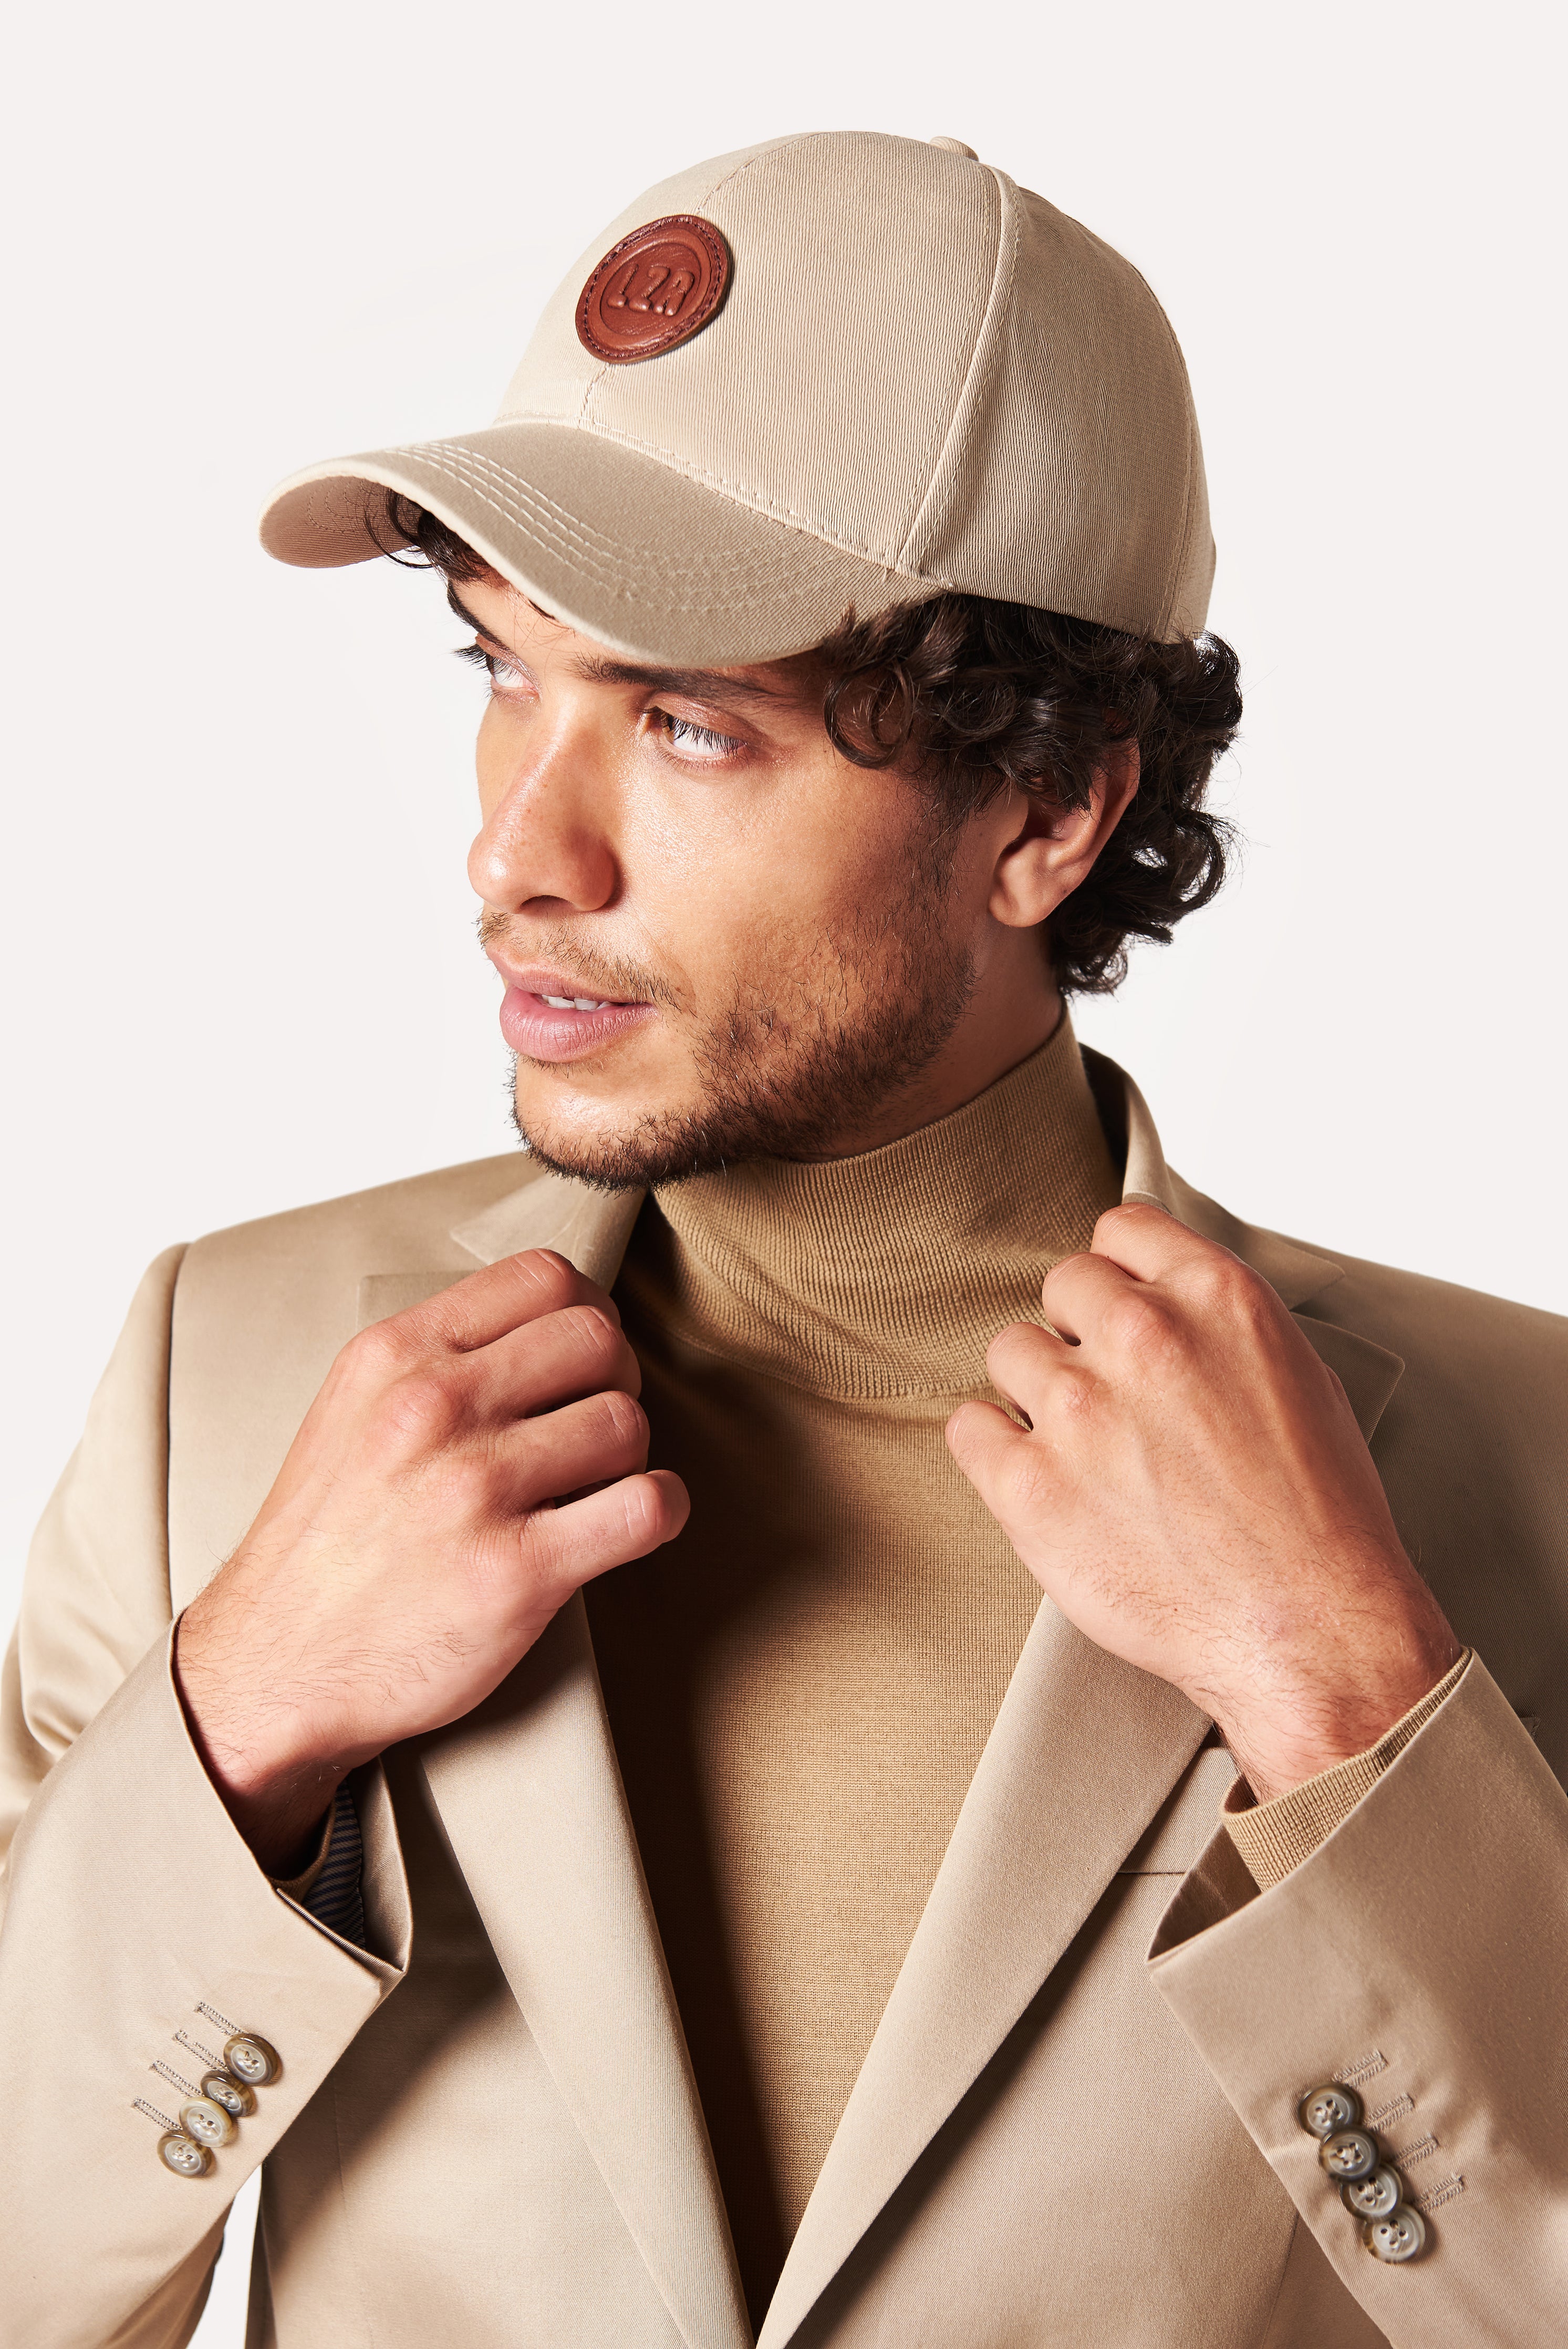 A model wears a Beige Baseball Cap with a Patched Leather Lazaro Logo and a leather adjustable strap. The model confidently displays the cap's size and craftsmanship while exuding a sense of style and elegance.